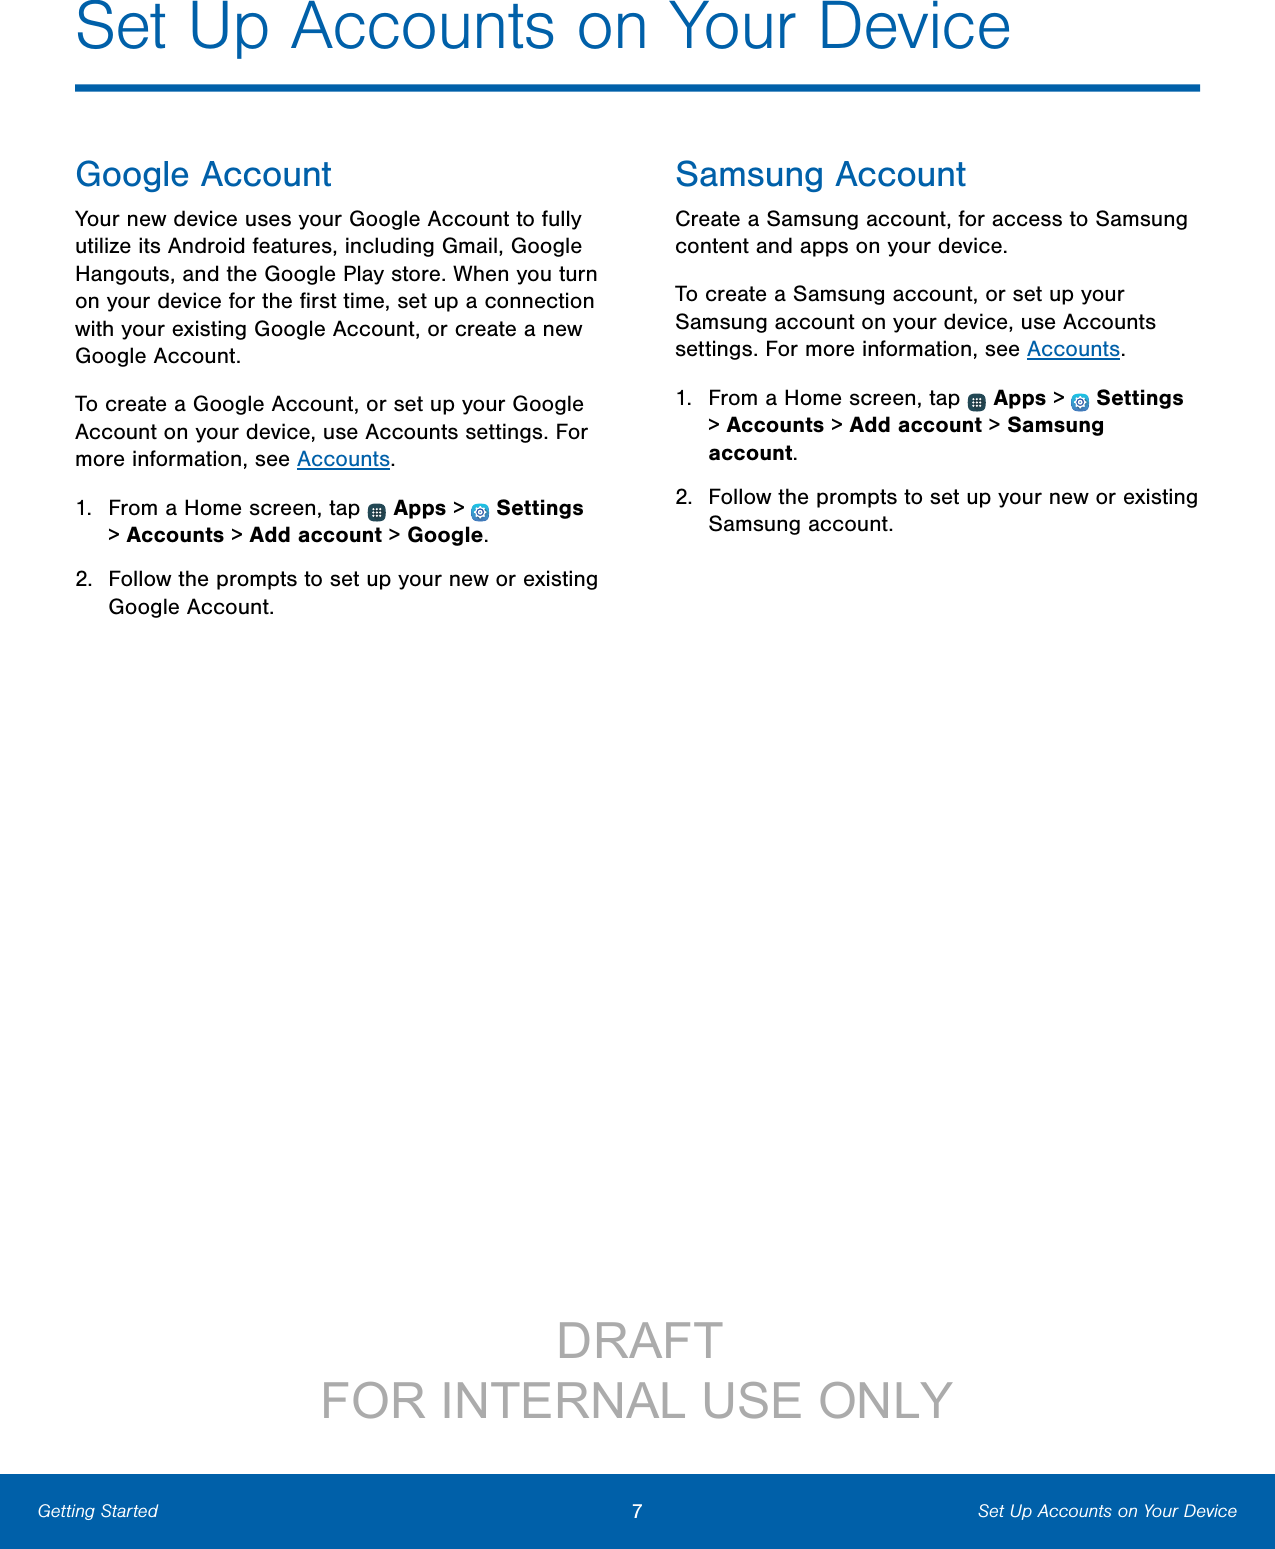 7Set Up Accounts on Your DeviceGetting StartedSet Up Accounts on Your DeviceGoogle AccountYour new device uses your Google Account to fully utilize its Android features, including Gmail, Google Hangouts, and the Google Play store. When you turn on your device for the ﬁrst time, set up a connection with your existing Google Account, or create a new Google Account.To create a Google Account, or set up your Google Account on your device, use Accounts settings. For more information, see Accounts. 1.  From a Home screen, tap   Apps &gt;  Settings &gt; Accounts &gt; Add account &gt; Google.2.  Follow the prompts to set up your new or existing Google Account.Samsung AccountCreate a Samsung account, for access to Samsung content and apps on your device. To create a Samsung account, or set up your Samsung account on your device, use Accounts settings. For more information, see Accounts.1.  From a Home screen, tap   Apps &gt;  Settings &gt; Accounts &gt; Add account &gt; Samsung account.2.  Follow the prompts to set up your new or existing Samsung account.DRAFT FOR INTERNAL USE ONLY